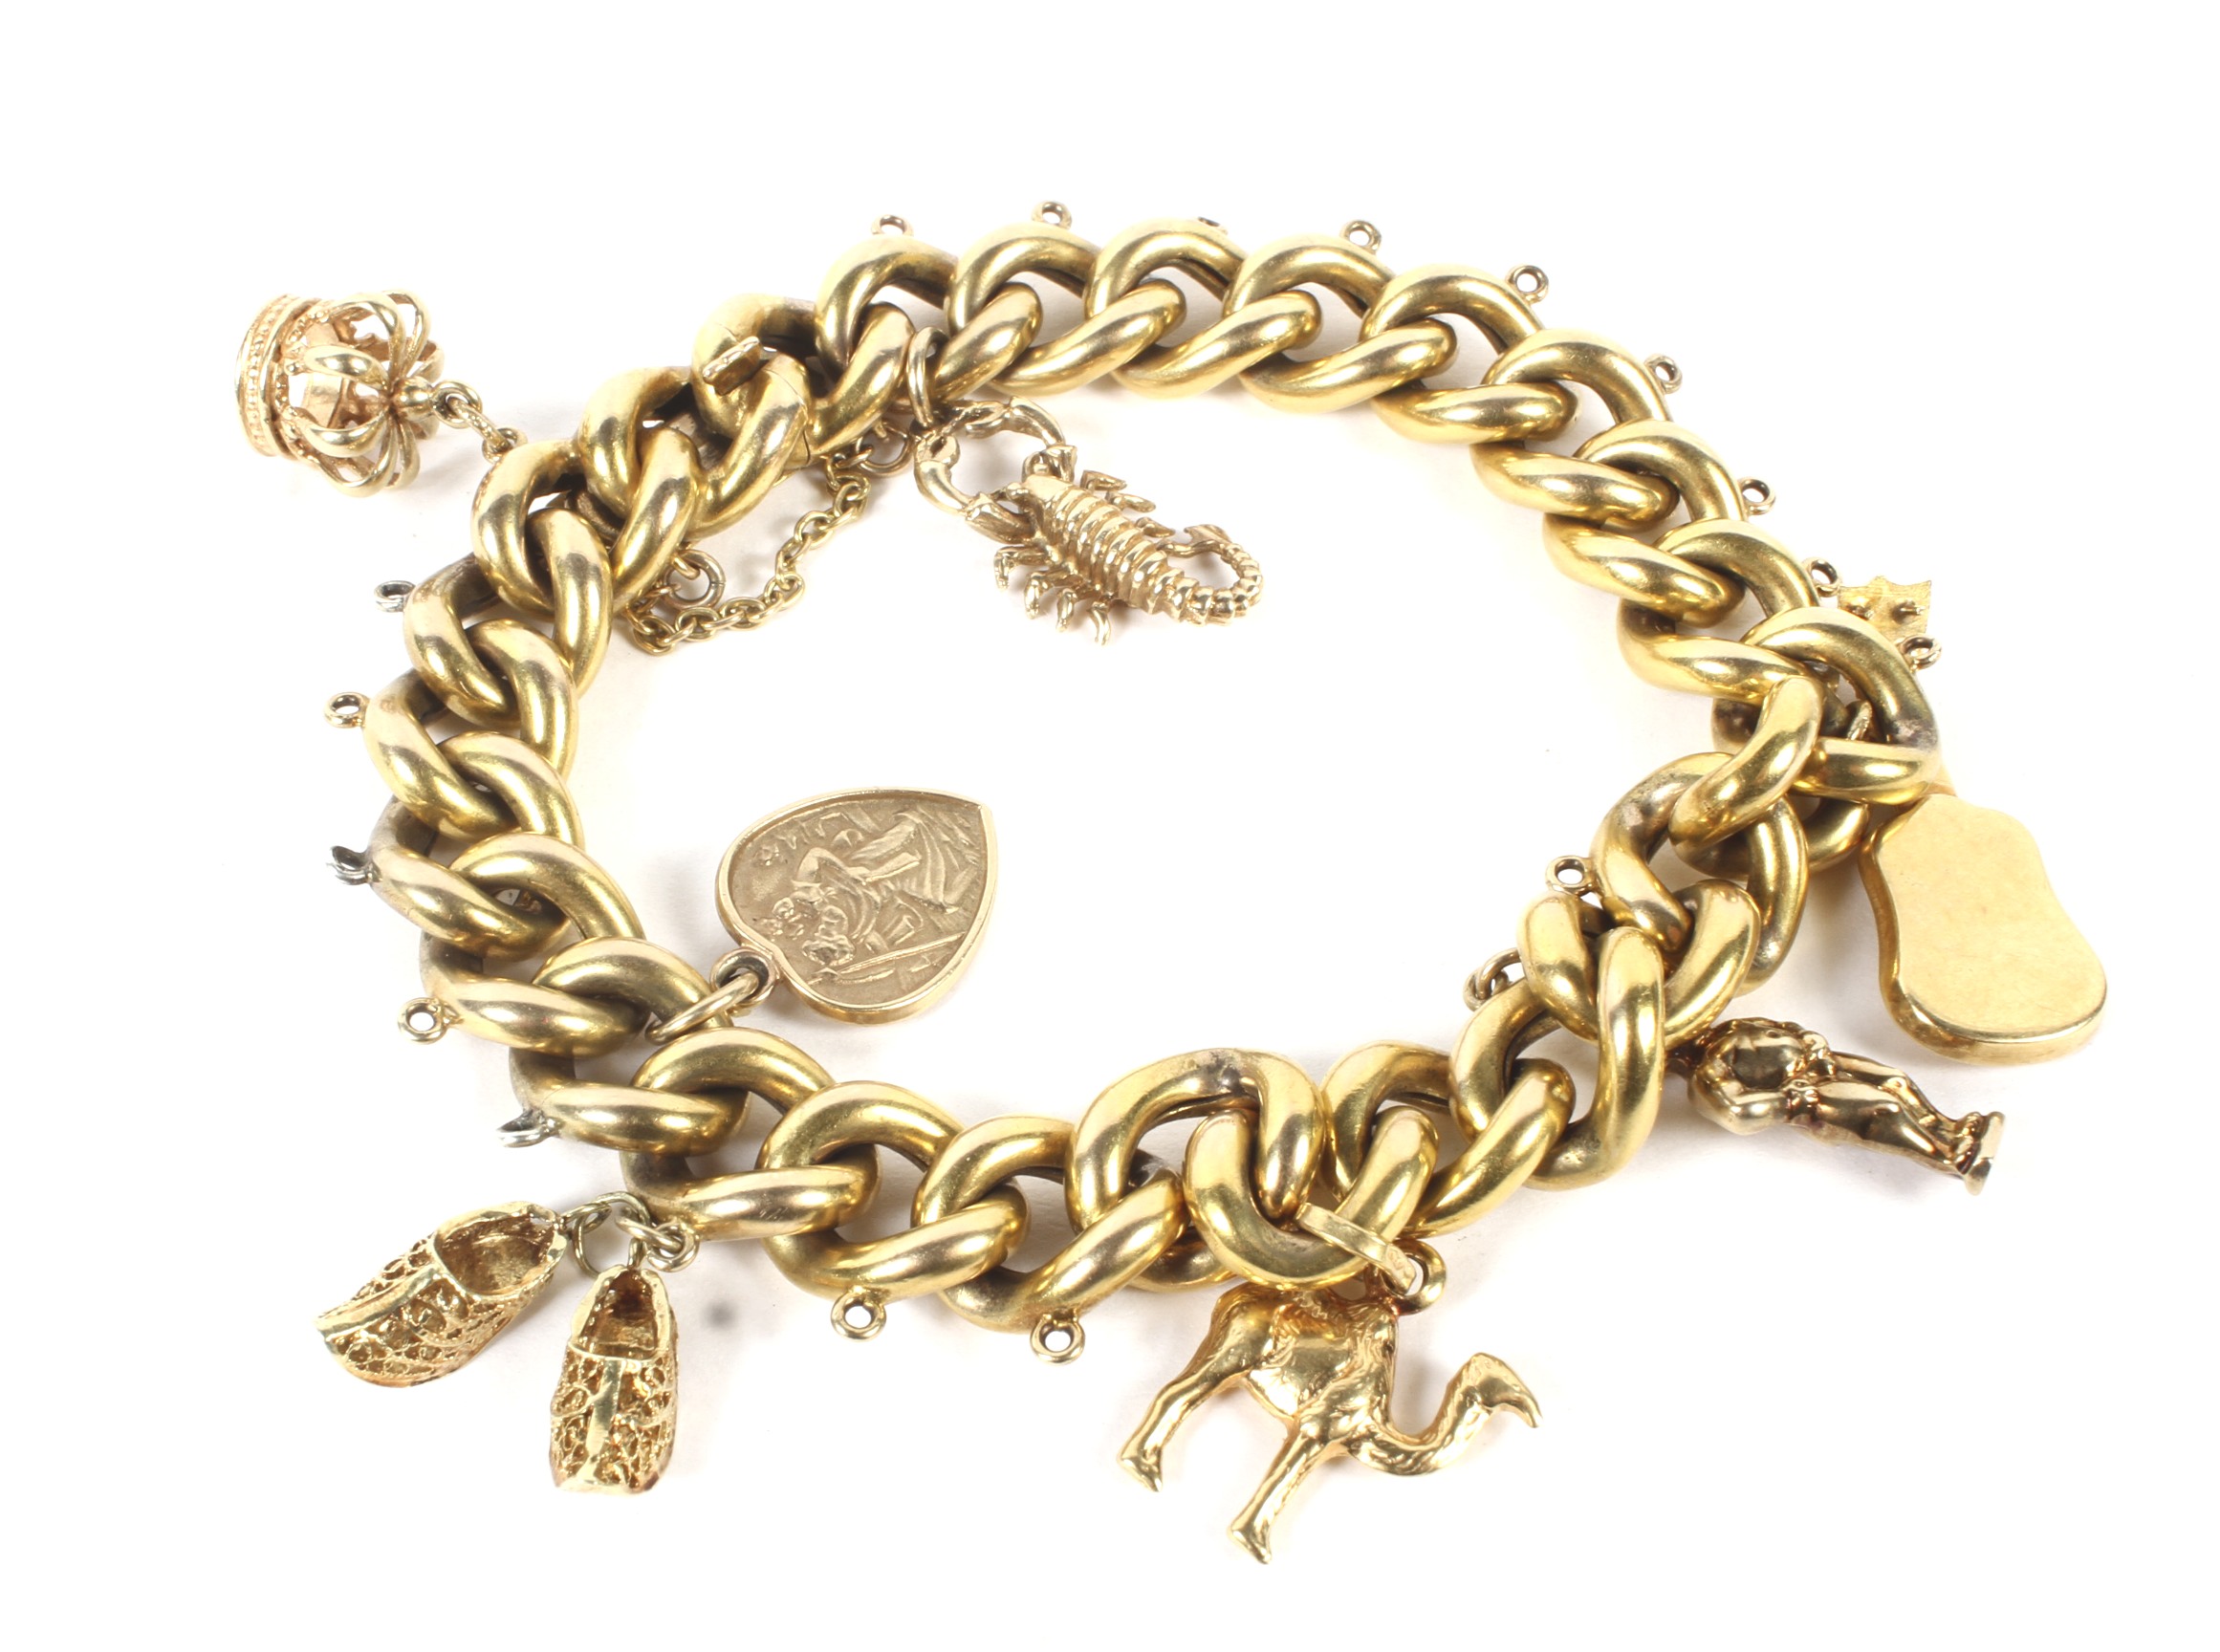 An early 20th century hollow gold charm bracelet.